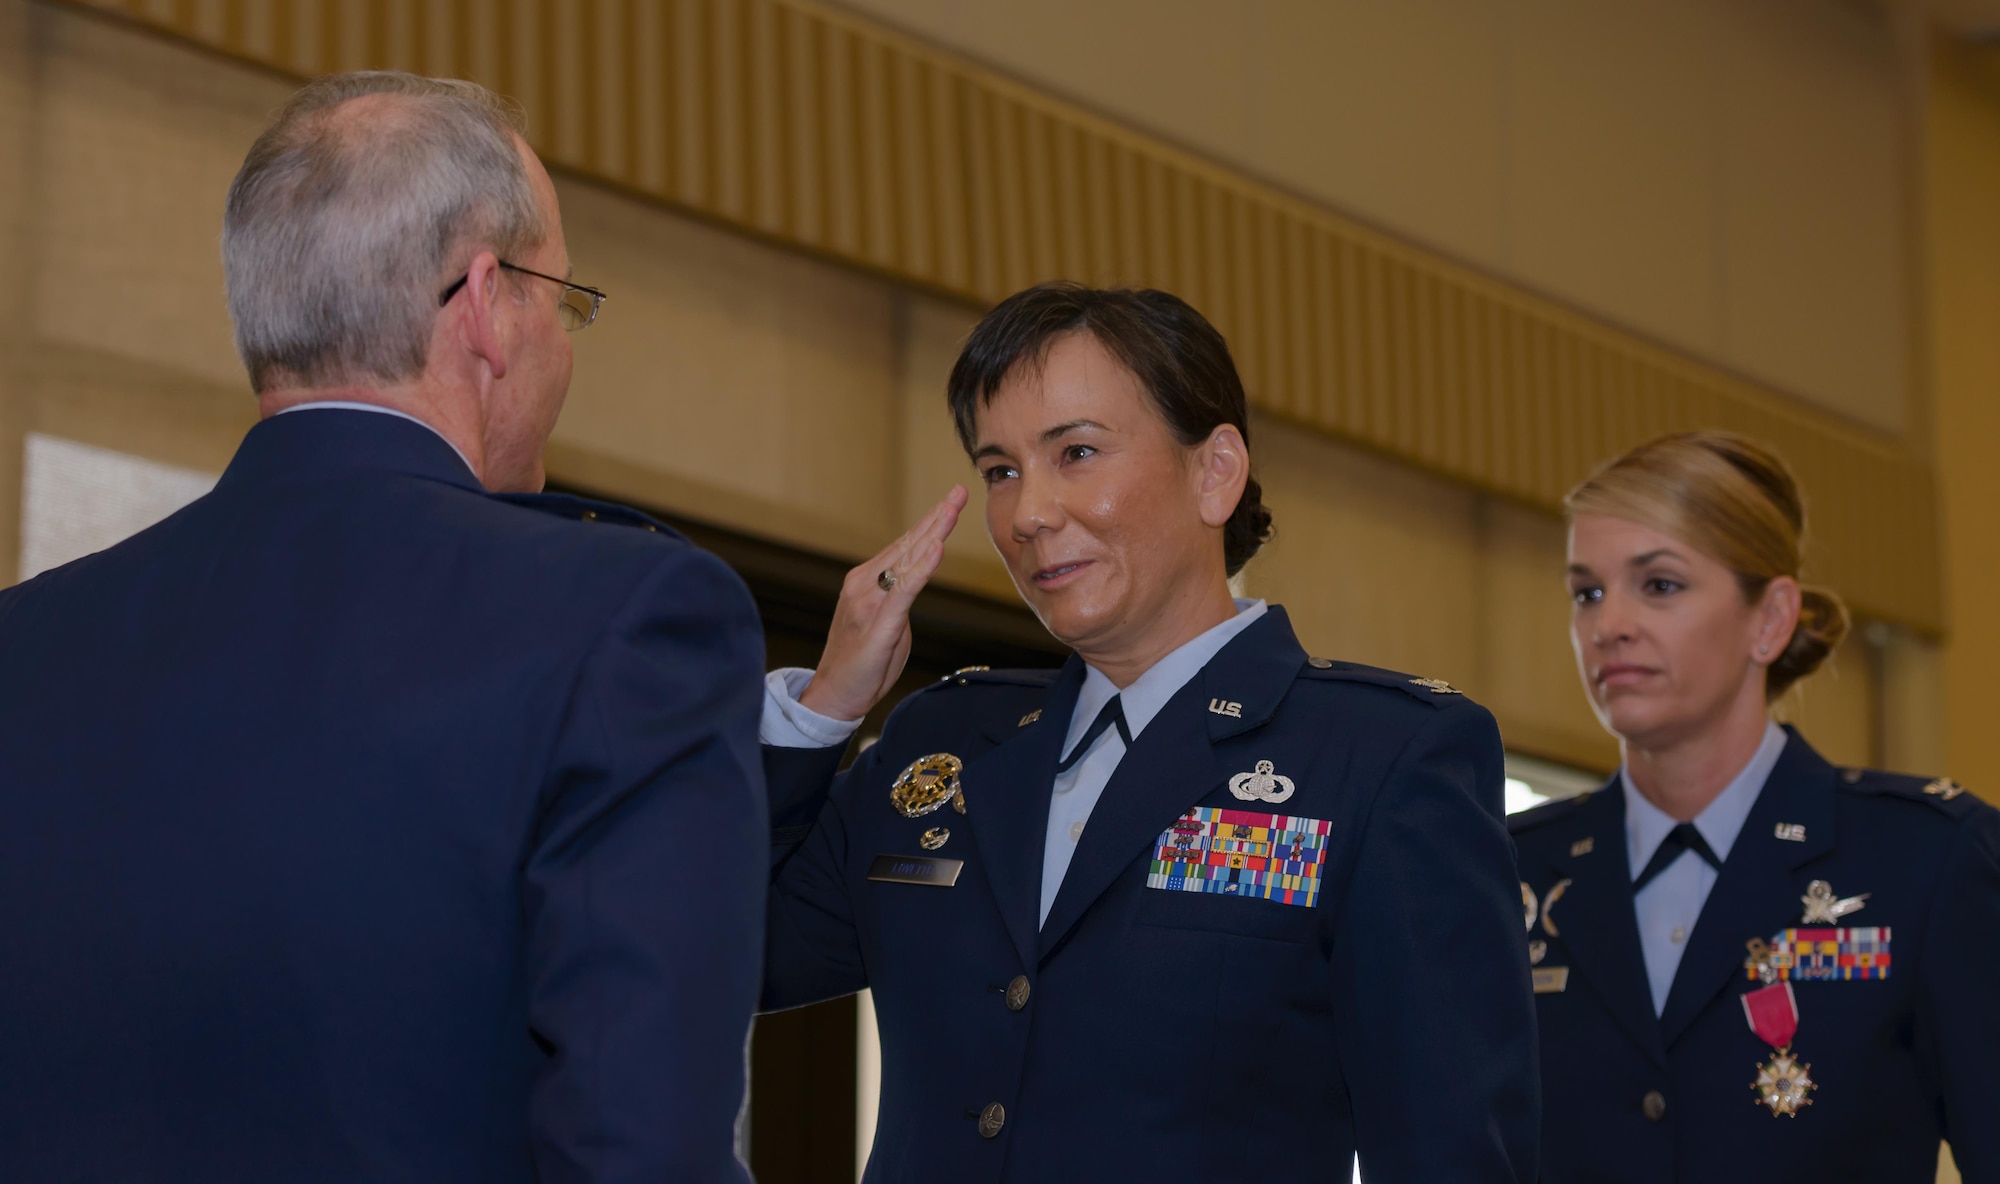 Col. Debra Lovette, 81st Training Wing commander, assumes command of the 81st TRW from Maj. Gen. Bob LaBrutta, 2nd Air Force commander, during a change of command ceremony at the Bay Breeze Event Center June 2, 2017, on Keesler Air Force Base, Miss. The ceremony is a symbol of command being exchanged from one commander to the next. Lovette assumed command of the 81st TRW from Col. Michele Edmondson. (U.S. Air Force photo by André Askew)